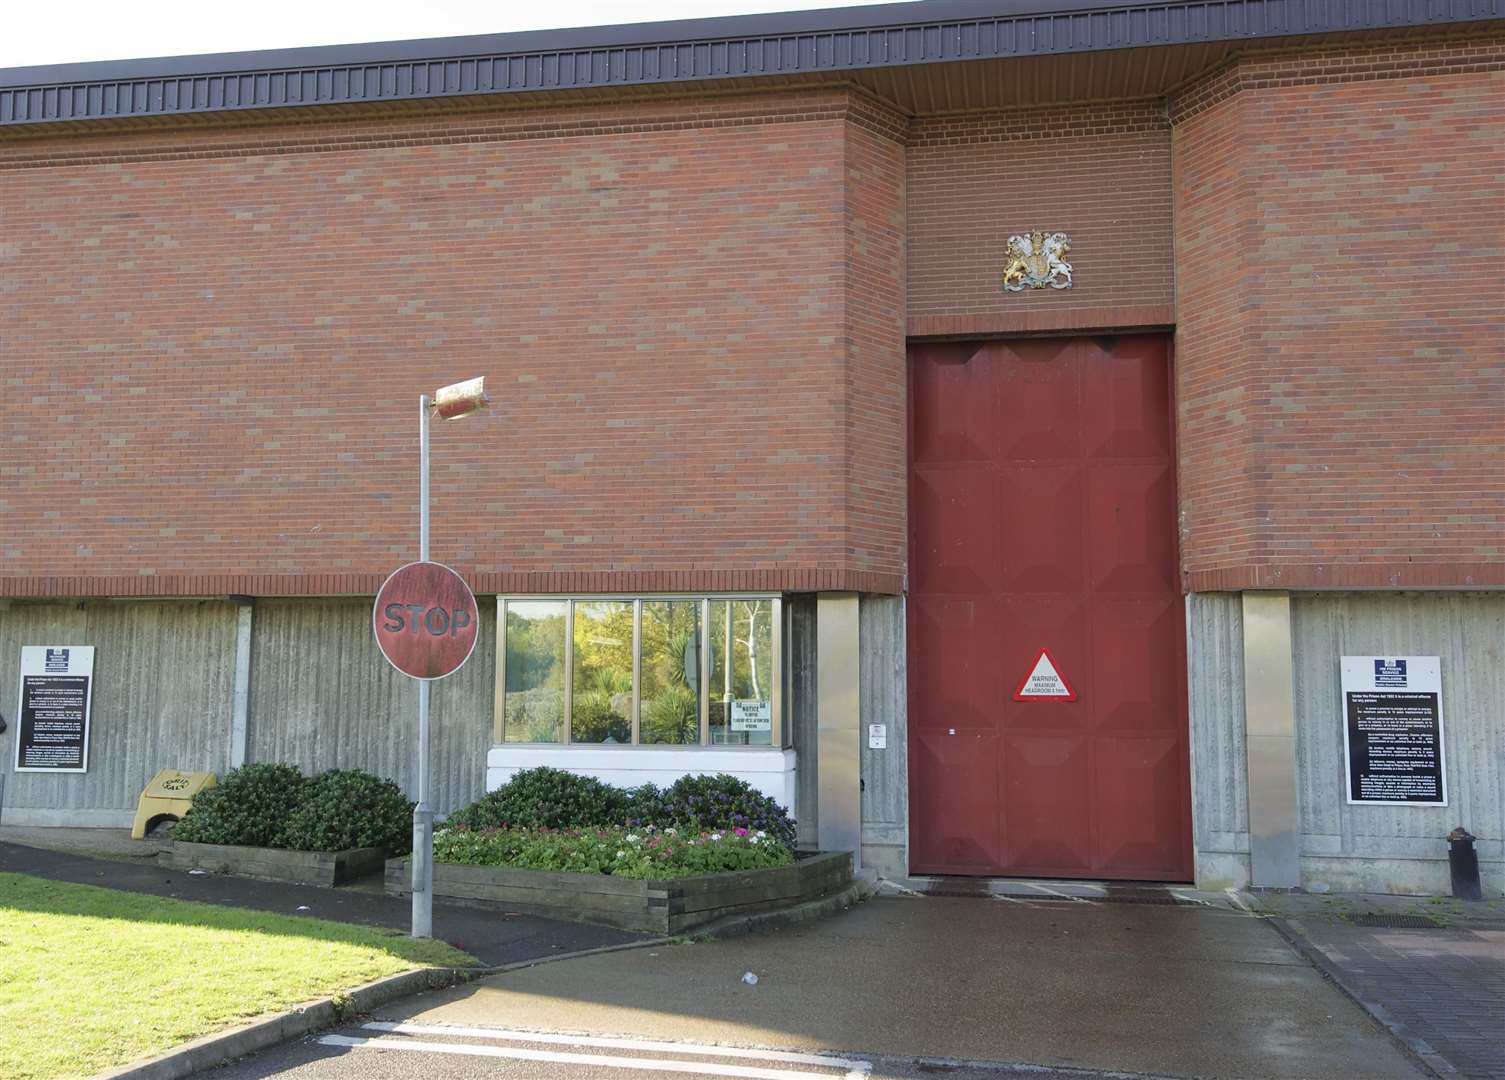 Swaleside Prison was the scene of a "frightening" fight involving inmates